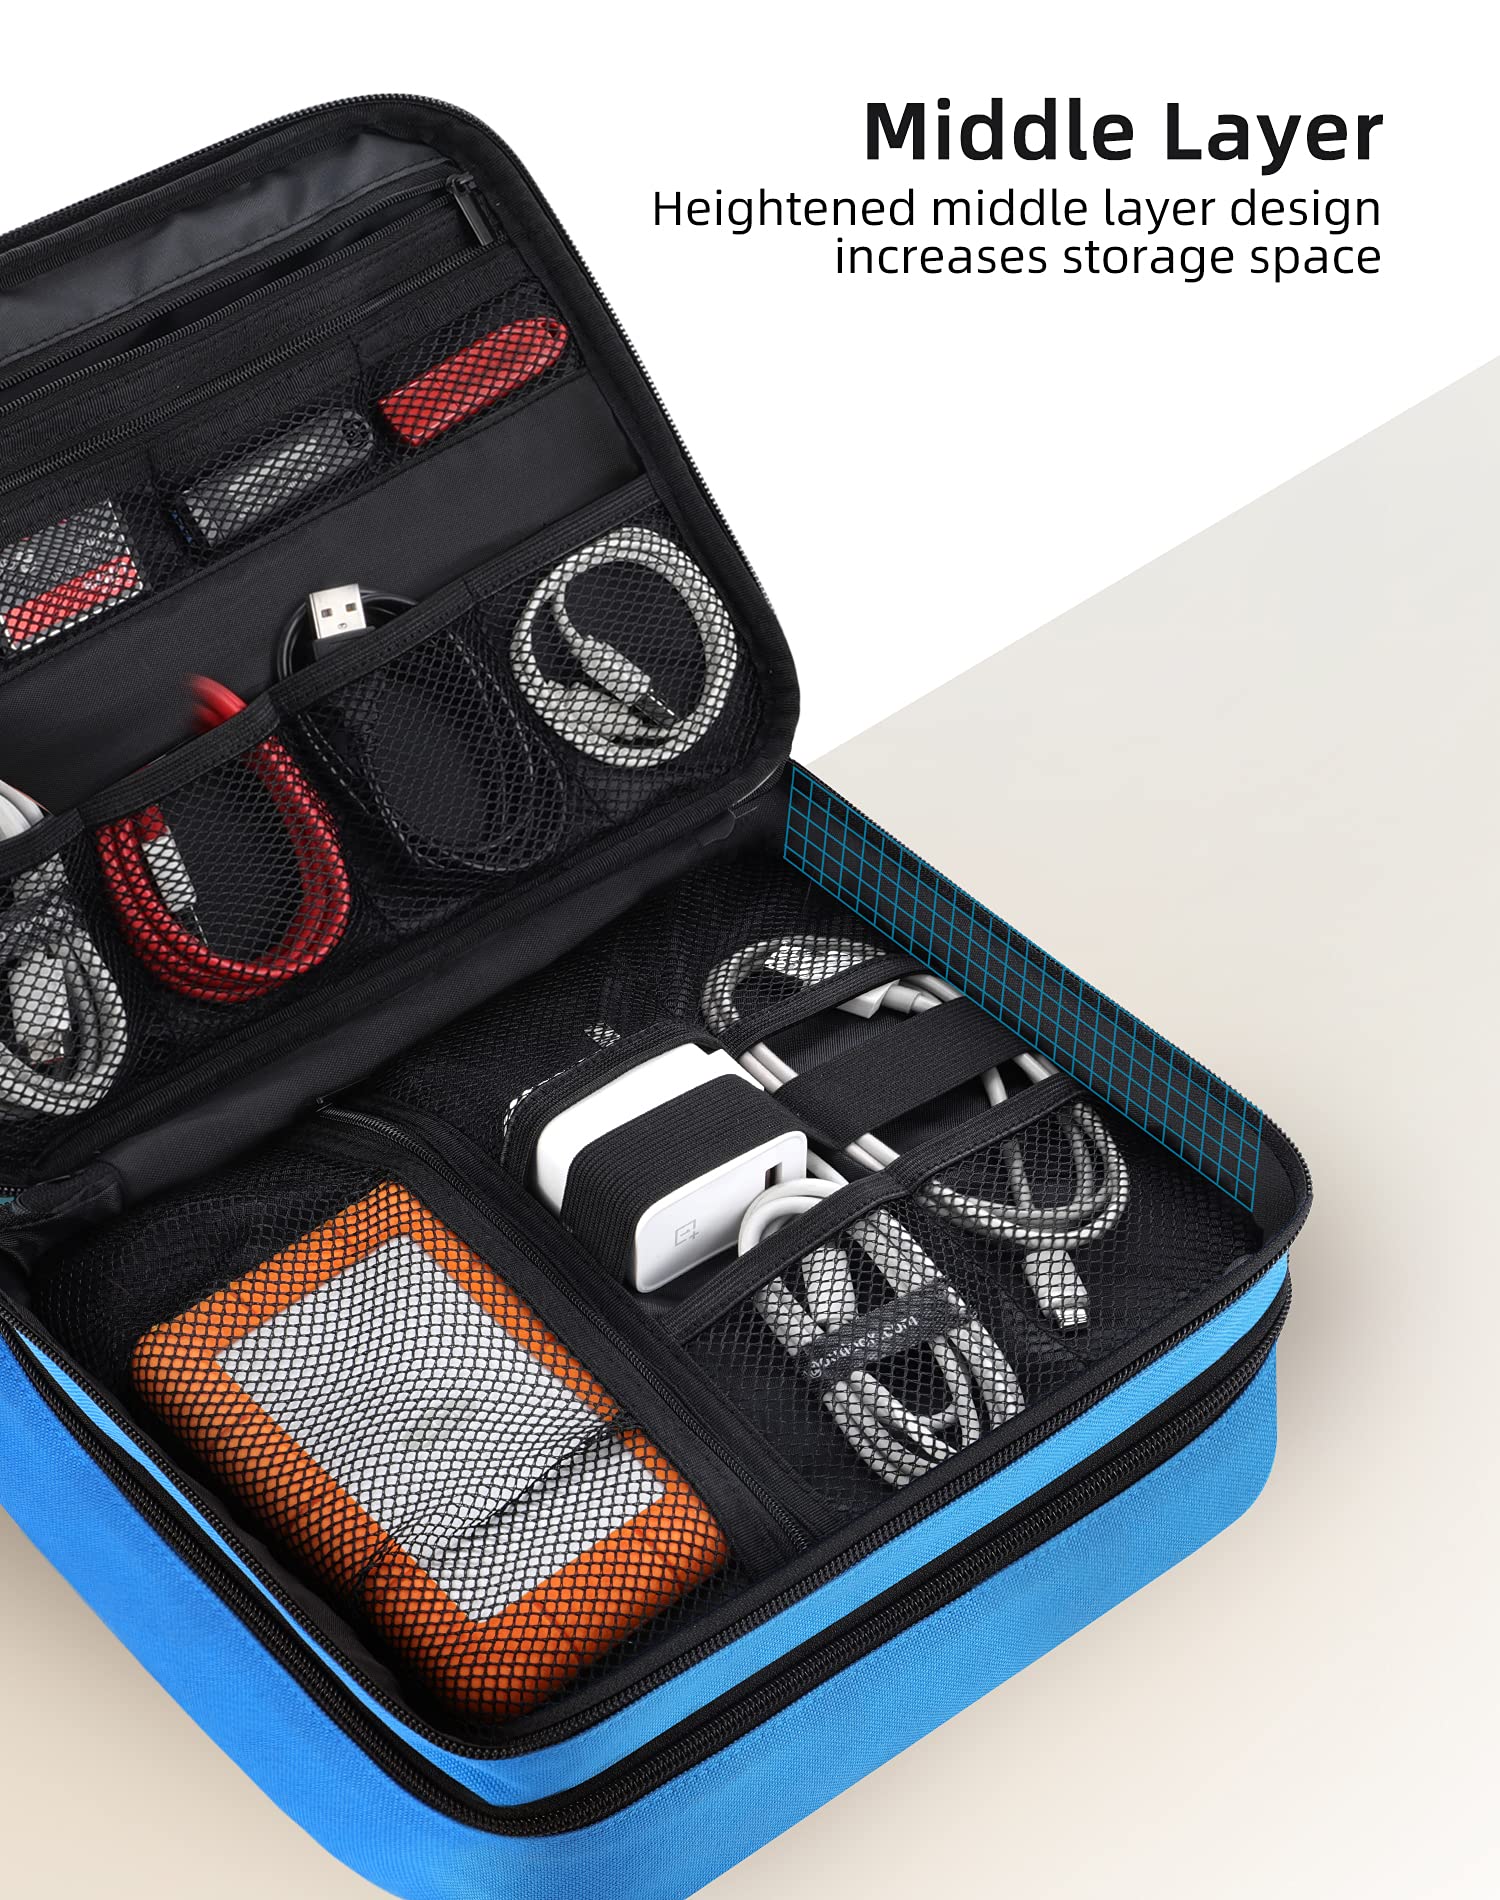 Electronics Travel Organizer-3 Layer Travel Cable Charger Storage Organizer bag with Shockproof Pokect for Tablet, Cord Organizer Case with DIY Storage Area,Tech Pounch for Electronic Accessories